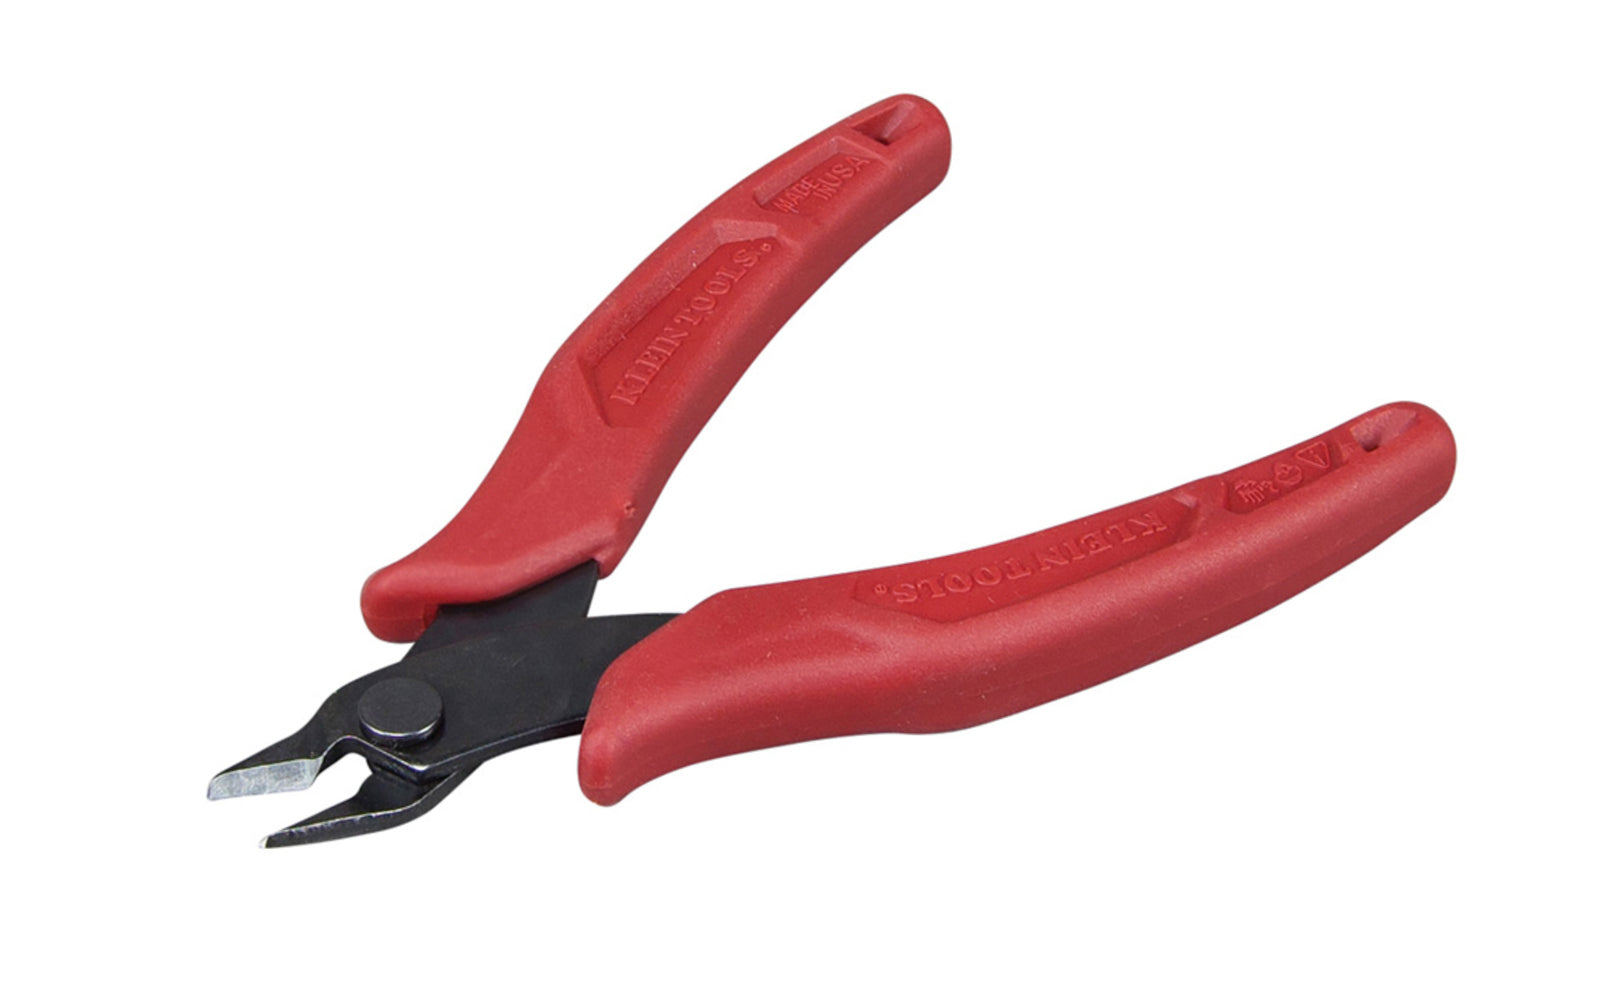 Klein Tools Precision Flush Cutter offers added comfort for cutting applications that demand precision and control. Improved knife design on these pliers snips soft wire up to 16 AWG for a flat, flush cut. Great for cutting small wire, zip ties and other fine material. Model D275-5. 